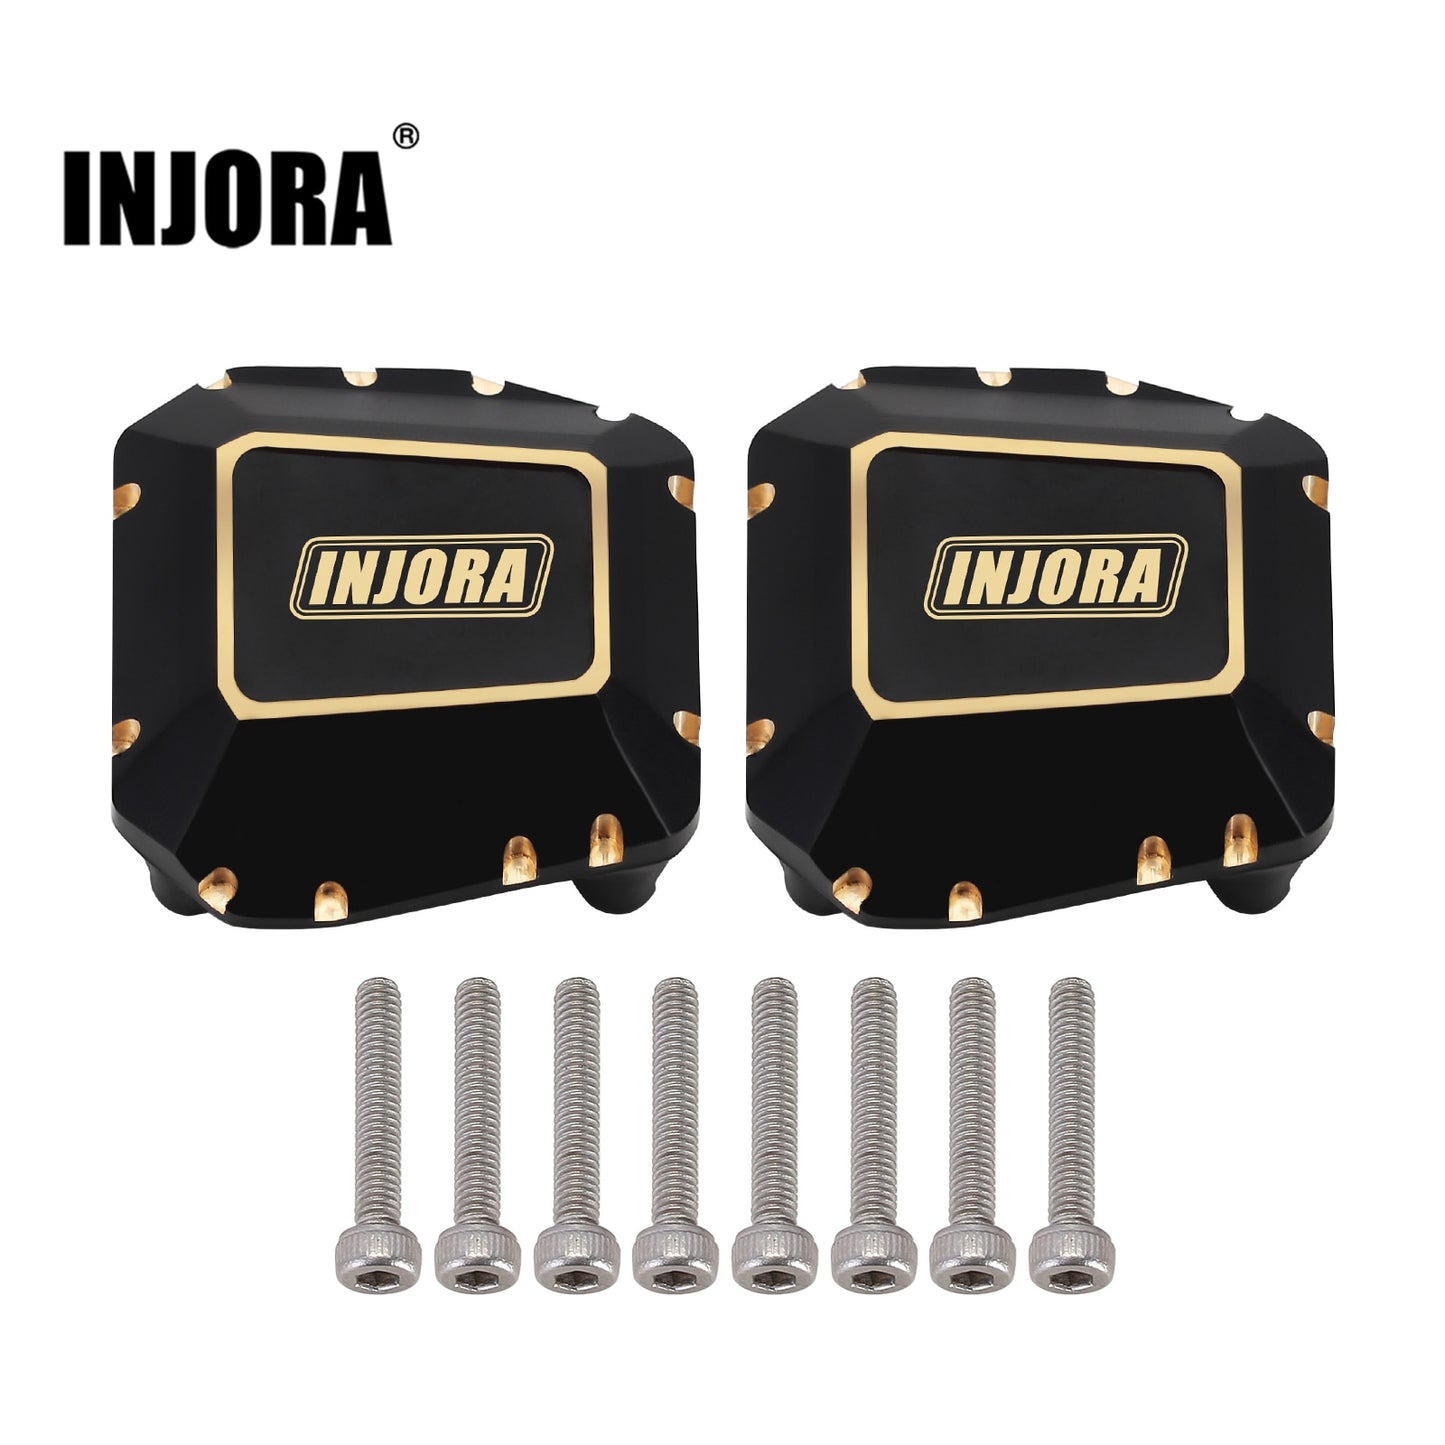 INJORA 38g Black Coating Brass Differential Axle Cover for 1/10 RC Crawler SCX10 PRO SCX10 III AR45 Upgrade